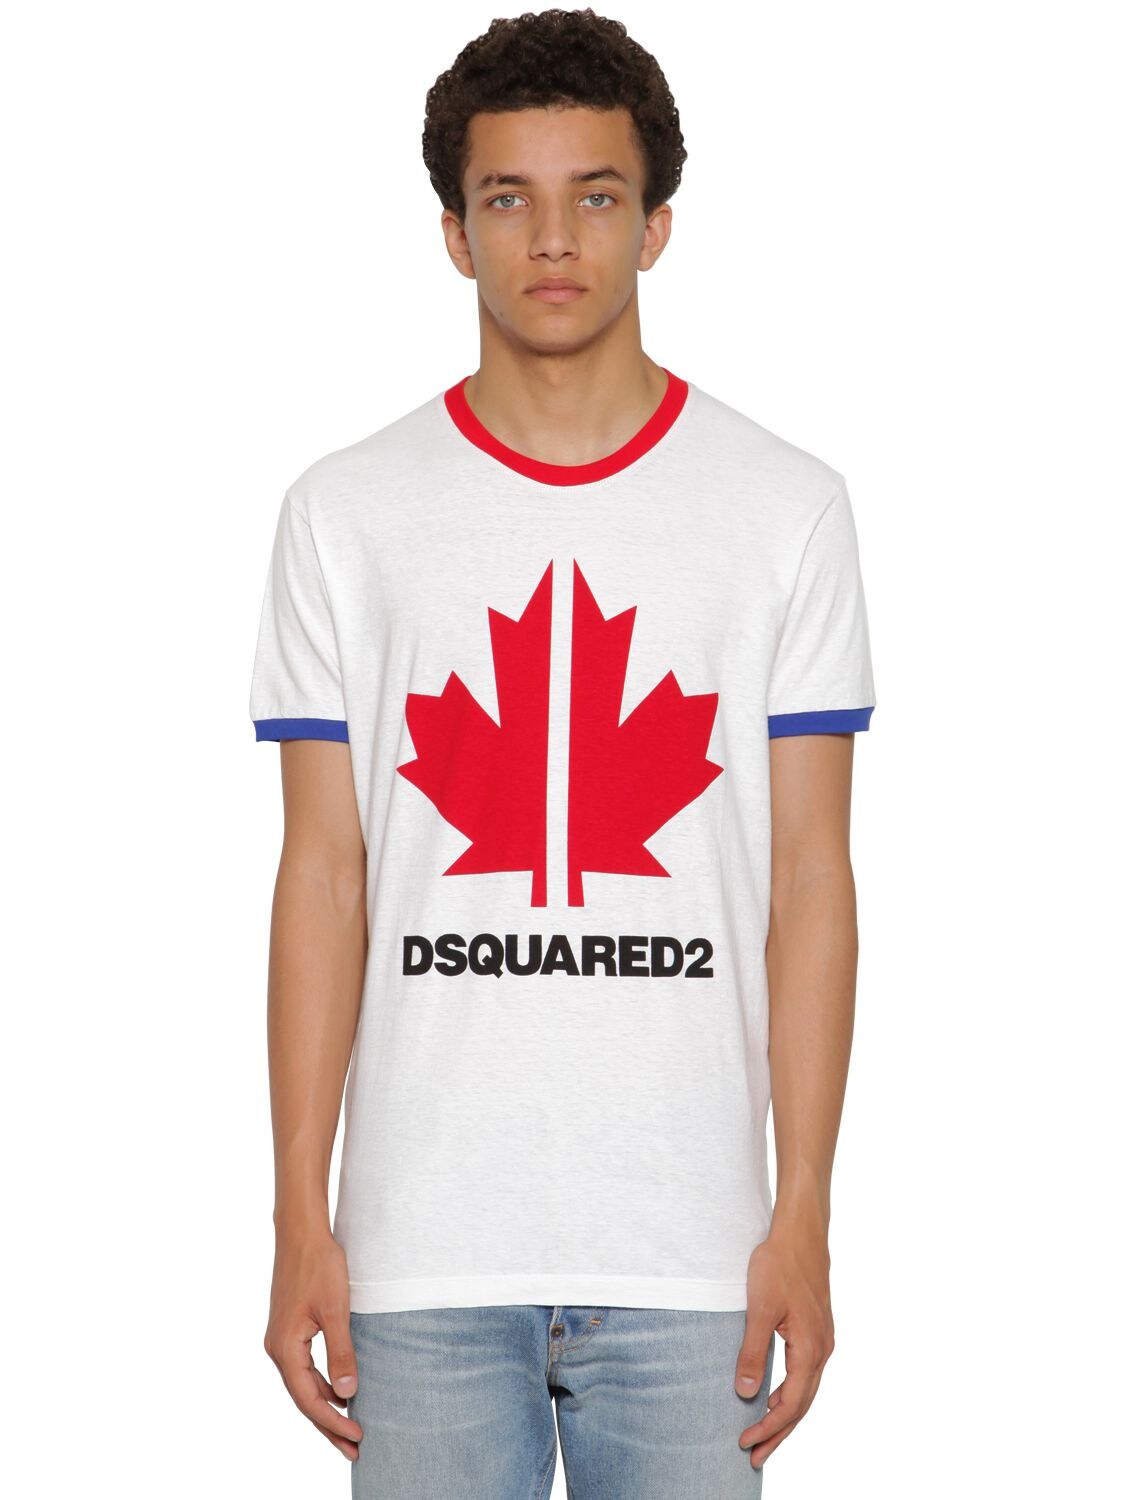 DSQUARED2 PRINT VERY VERY DAN FIT JERSEY T-SHIRT,71IG7E057-MTAW0